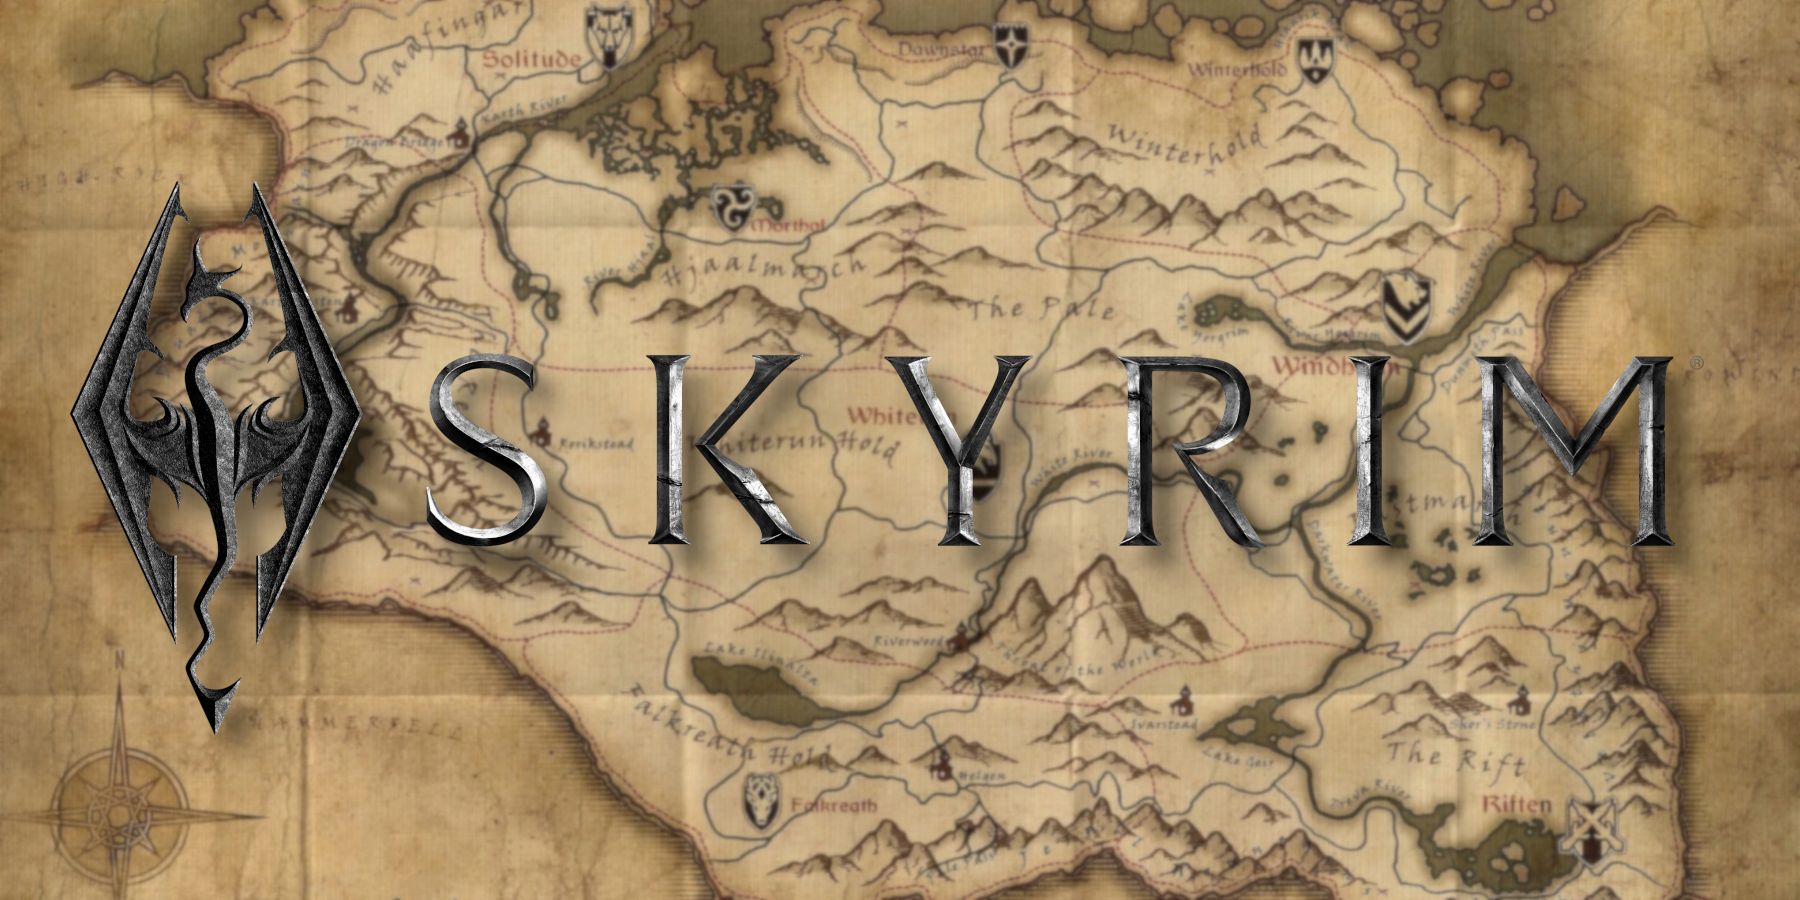 The skyrim logo with the game's world map behind it.